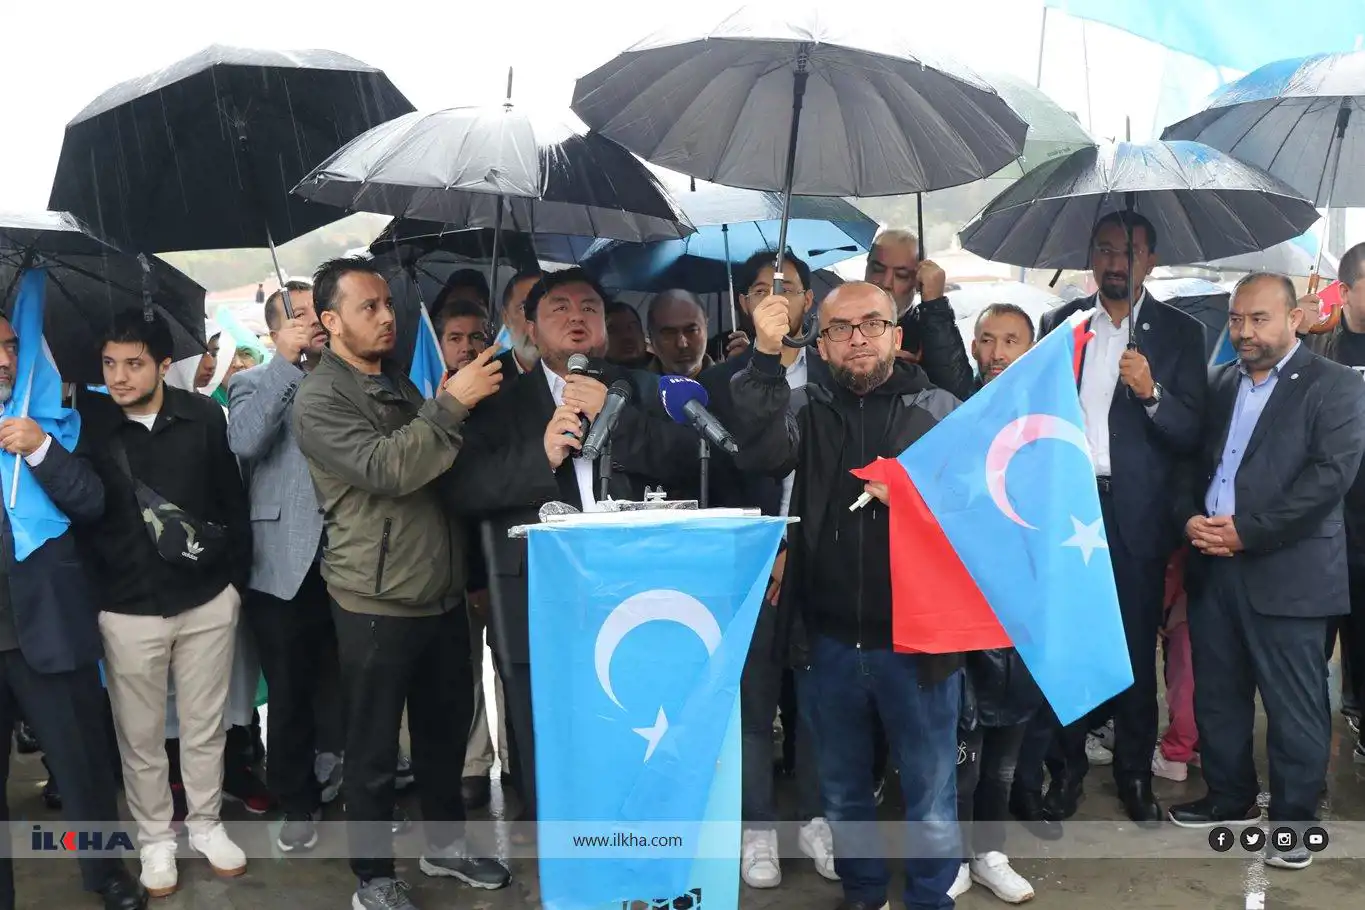 East Turkistan protesters rally in Istanbul, call for Islamic World support for independence